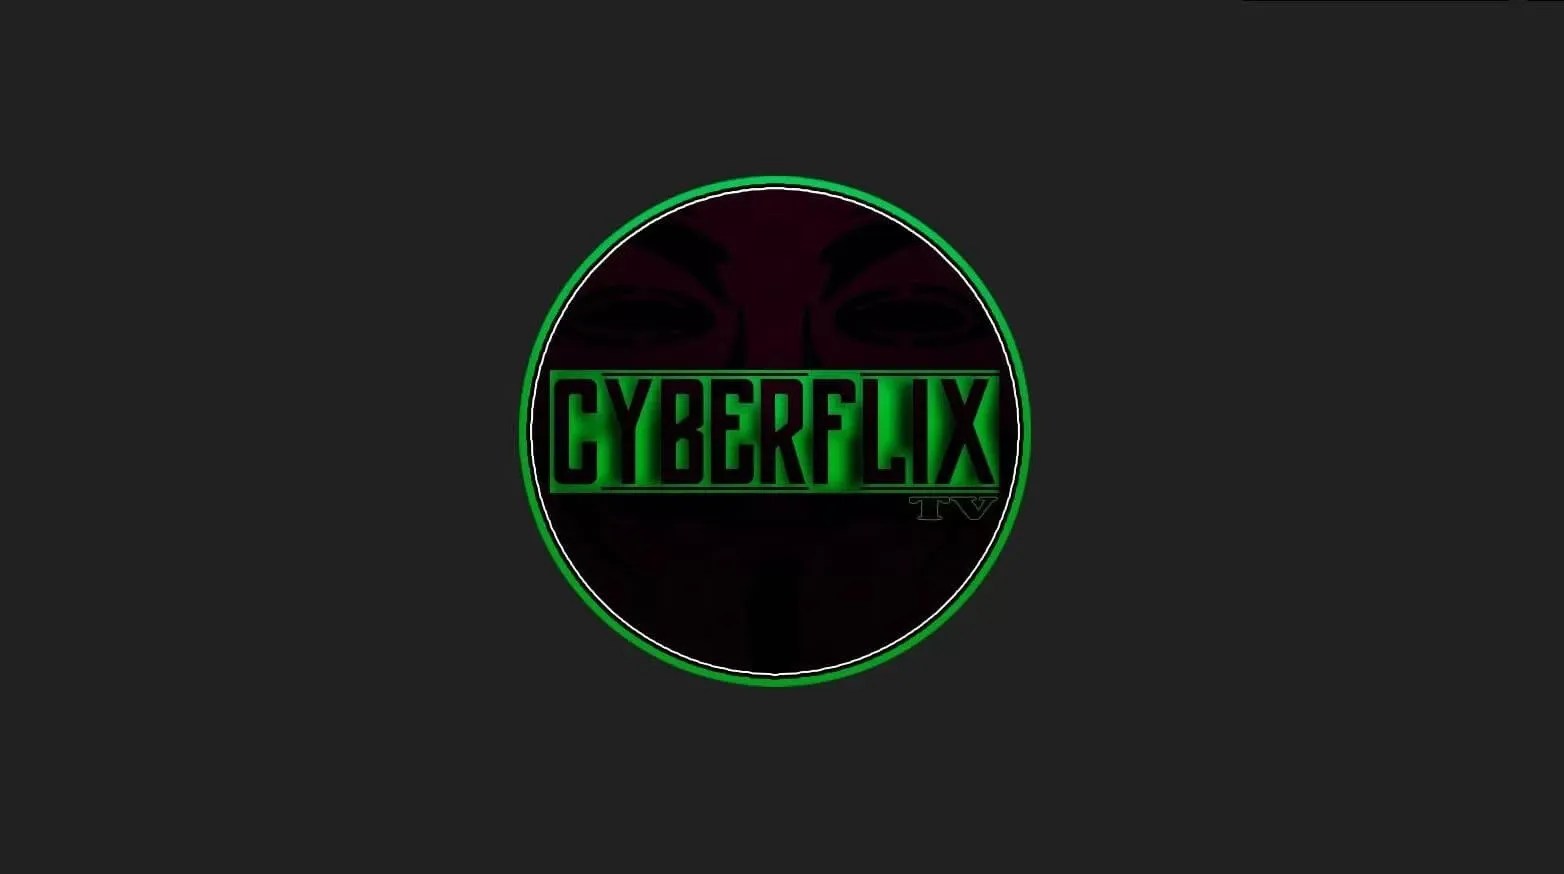 How to Download and Install CyberFlix TV App on your Android Devices